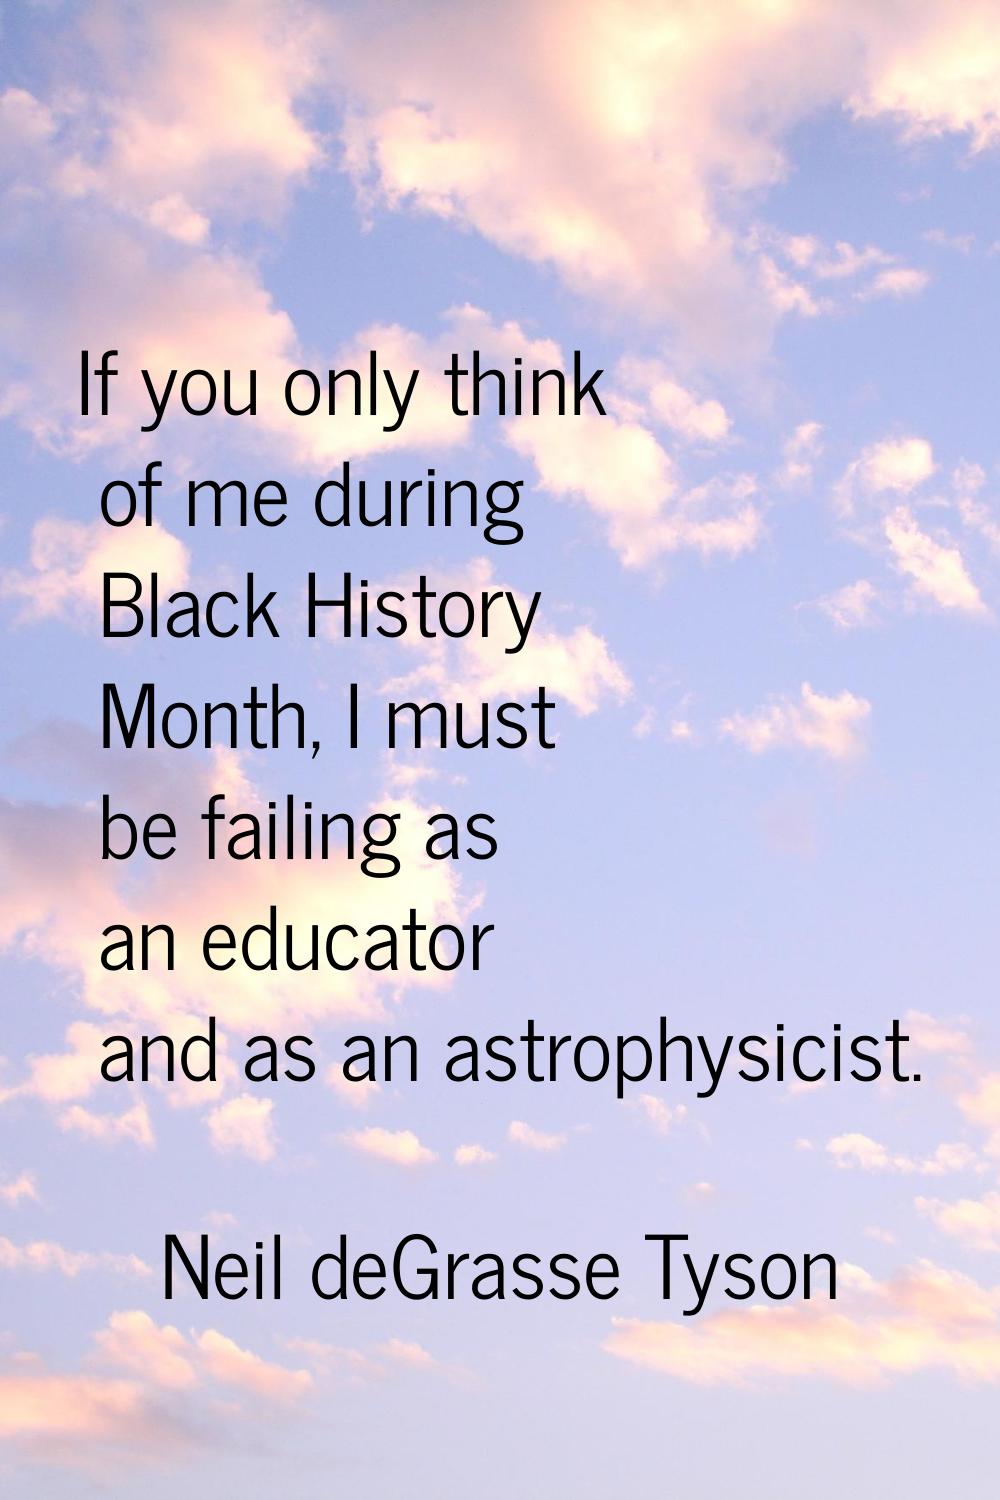 If you only think of me during Black History Month, I must be failing as an educator and as an astr